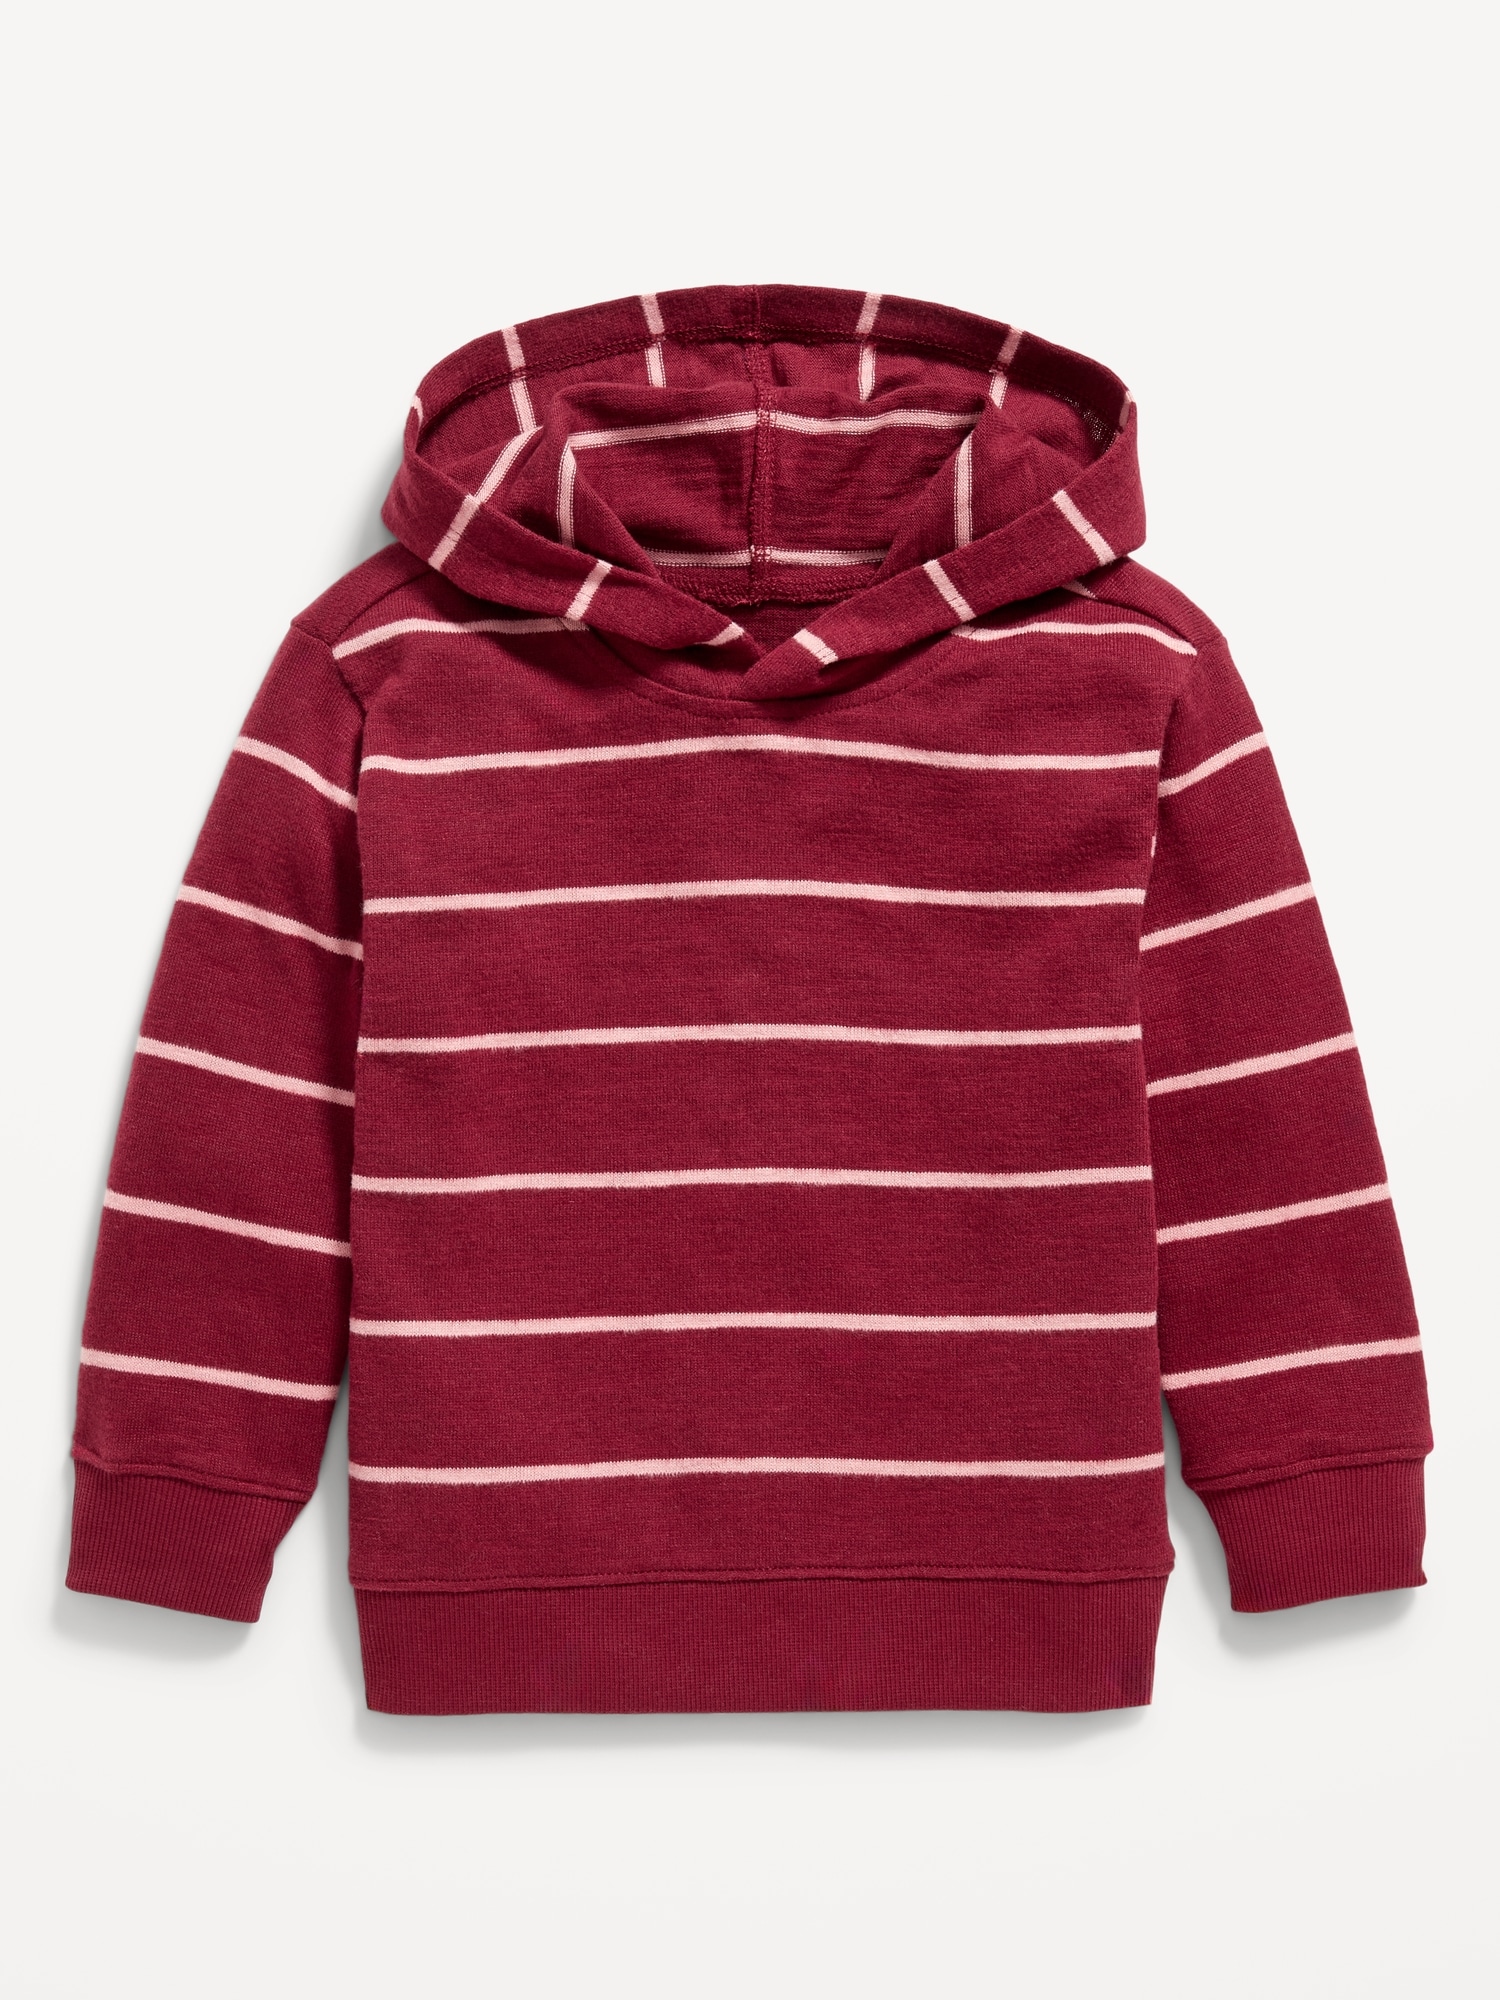 Striped Cozy-Knit Pullover Hoodie for Toddler Boys | Old Navy